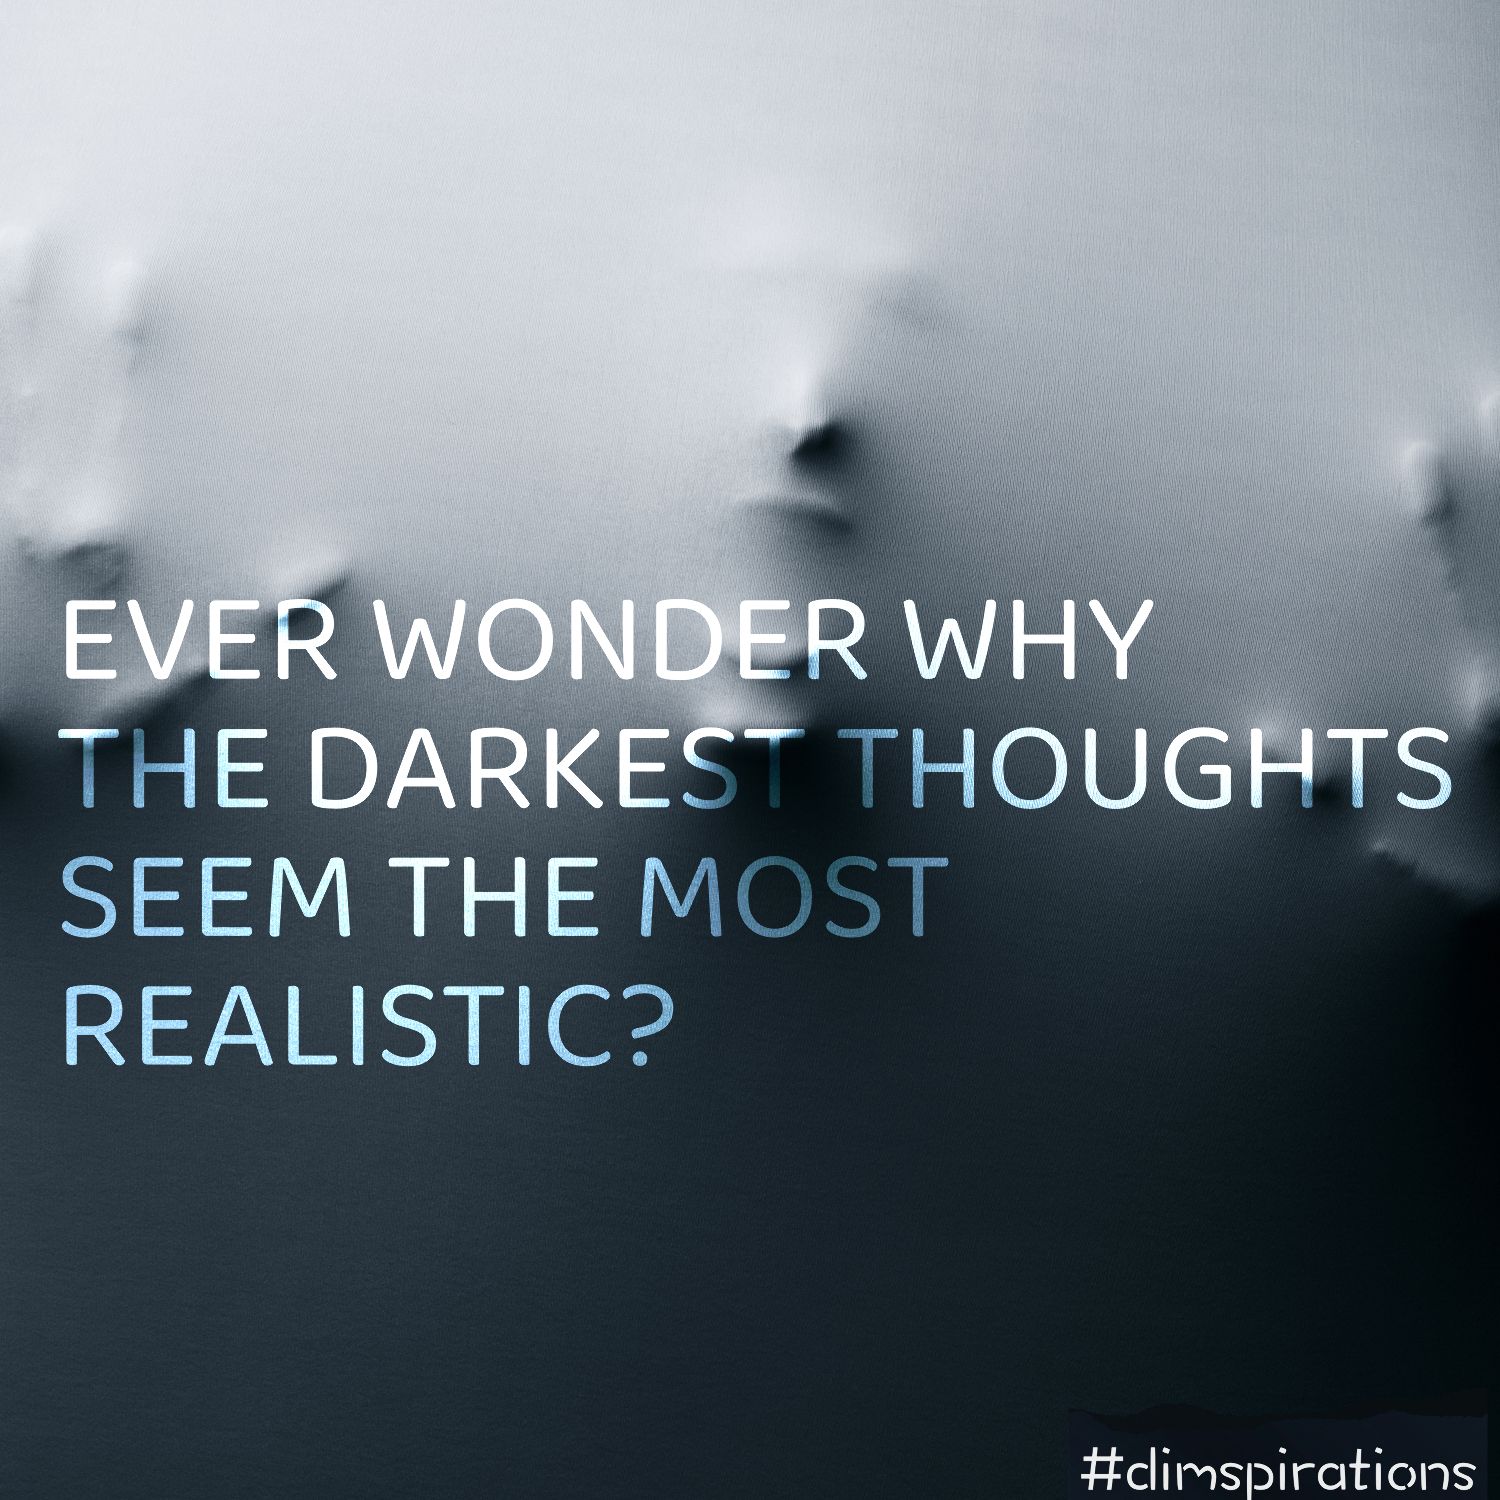 Ever wonder why the darkest thoughts seem the most realistic?